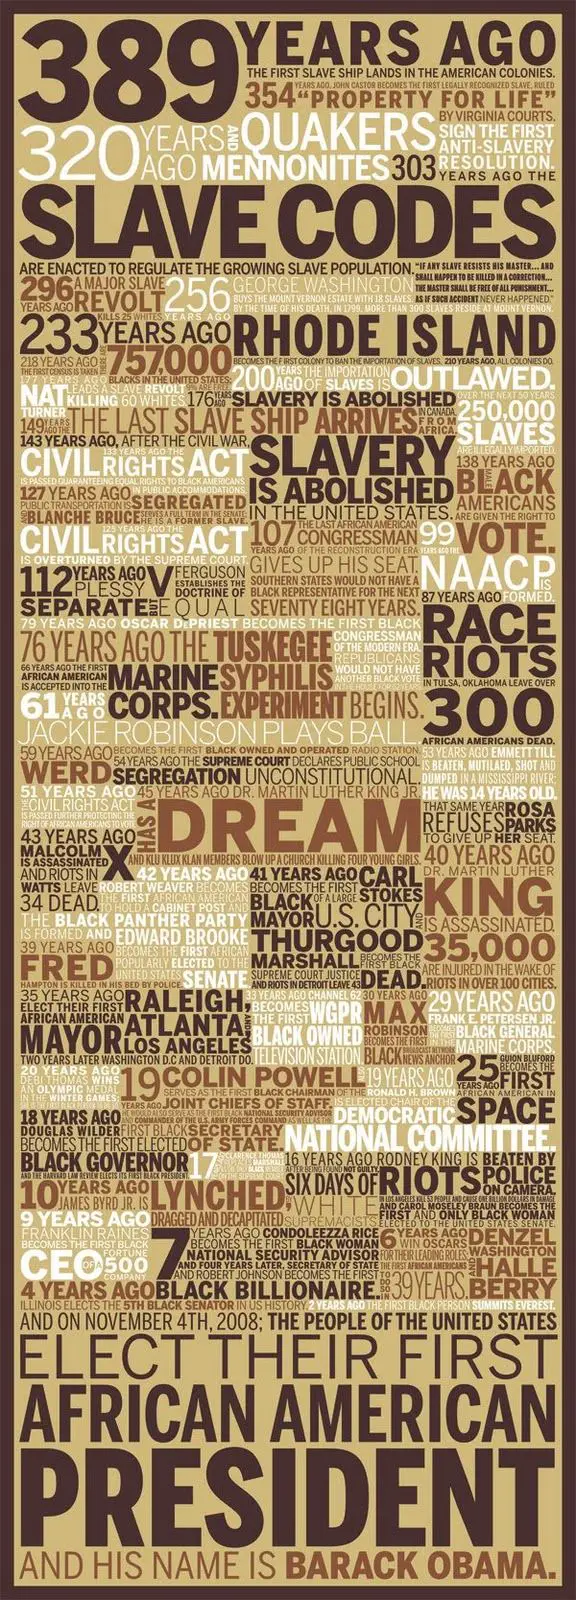 Black America Be Proud This 4th!! [INFOGRAPHIC]